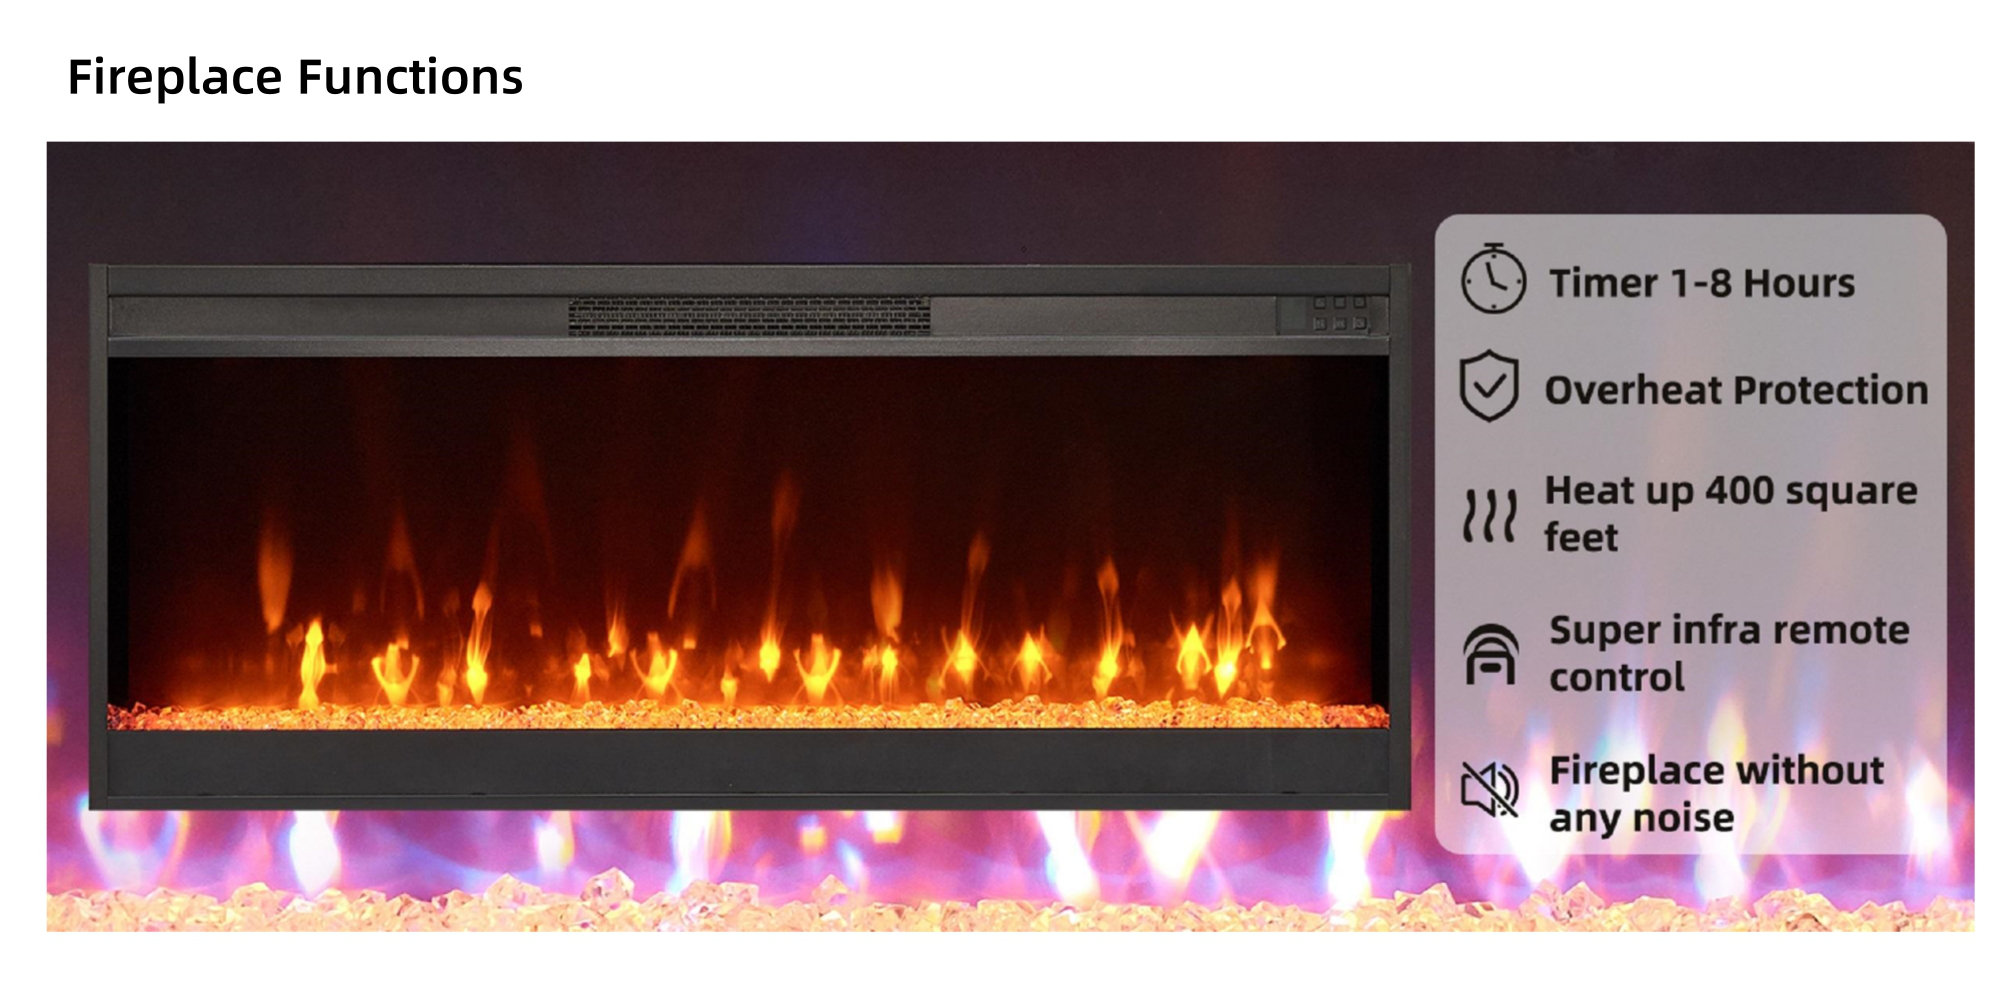 Fireplace function